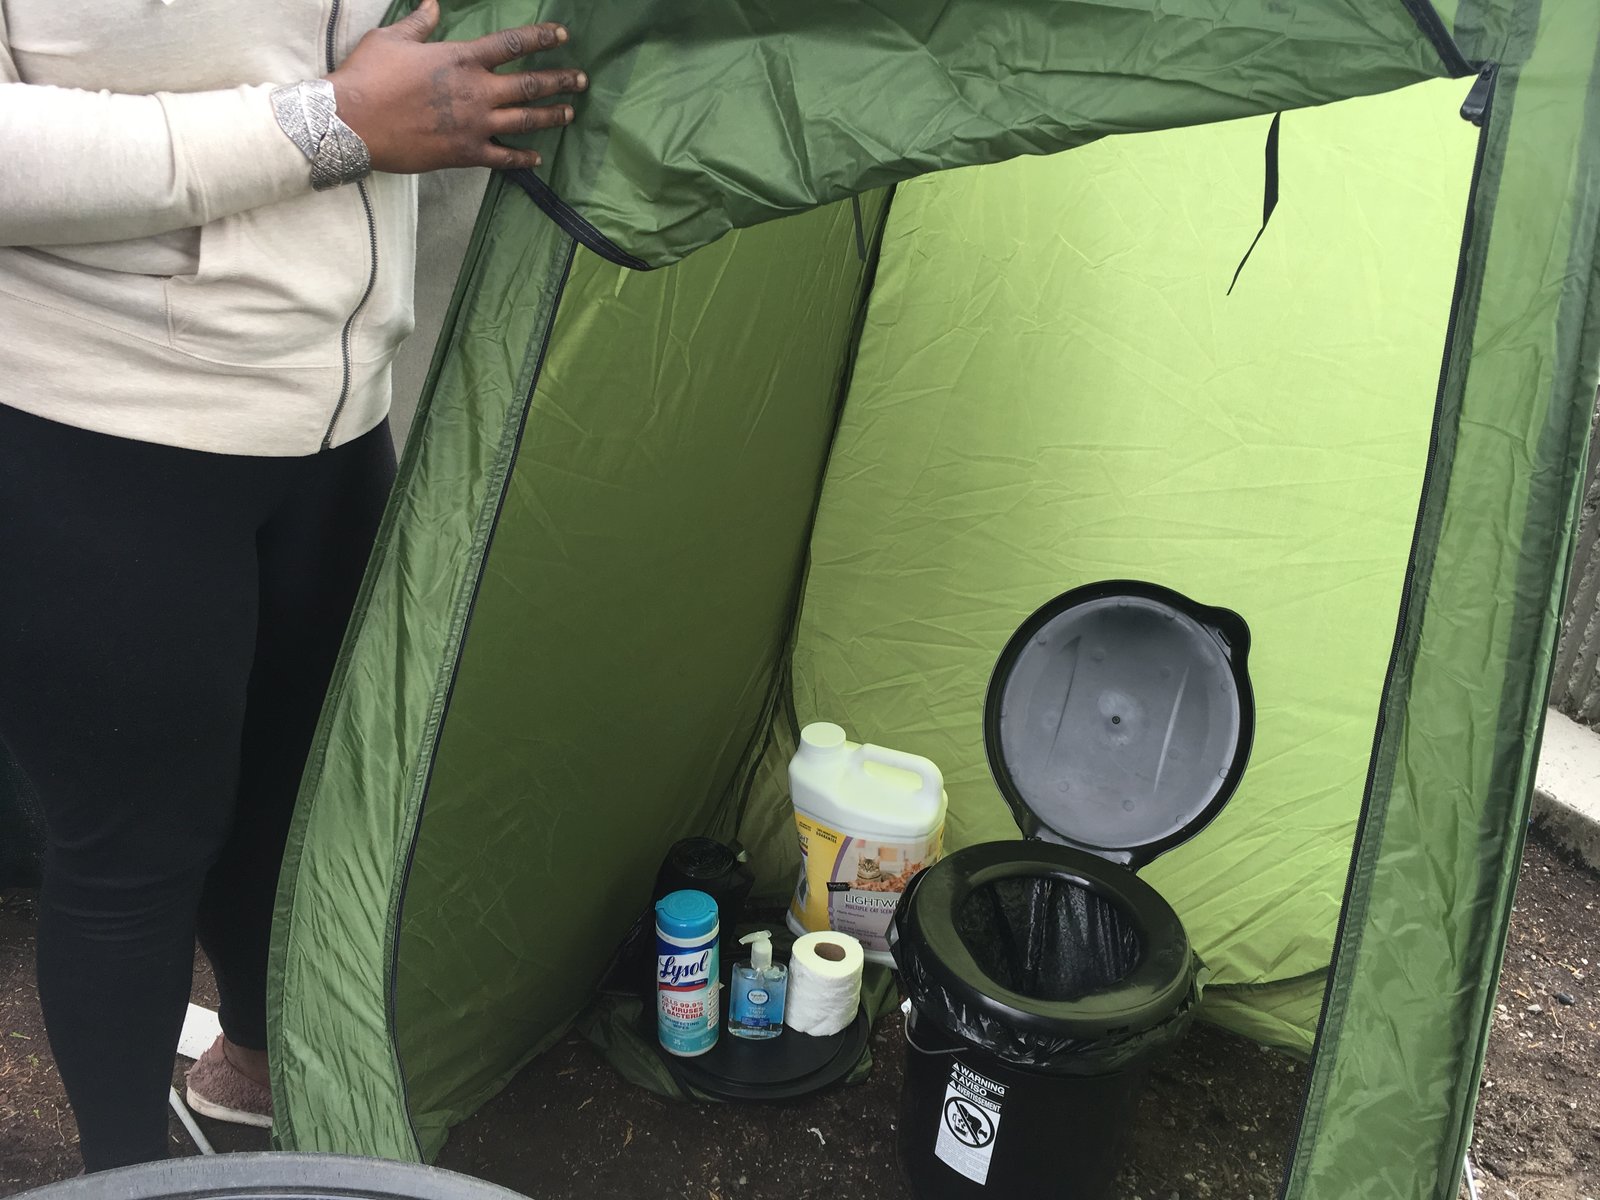 The basic toilet kit that Mark Lloyd distributes to homeless camps in Seattle includes a tent, bucket, seat, cat litter, toilet paper and sanitizer. CREDIT: Gabriel Spitzer/KNKX